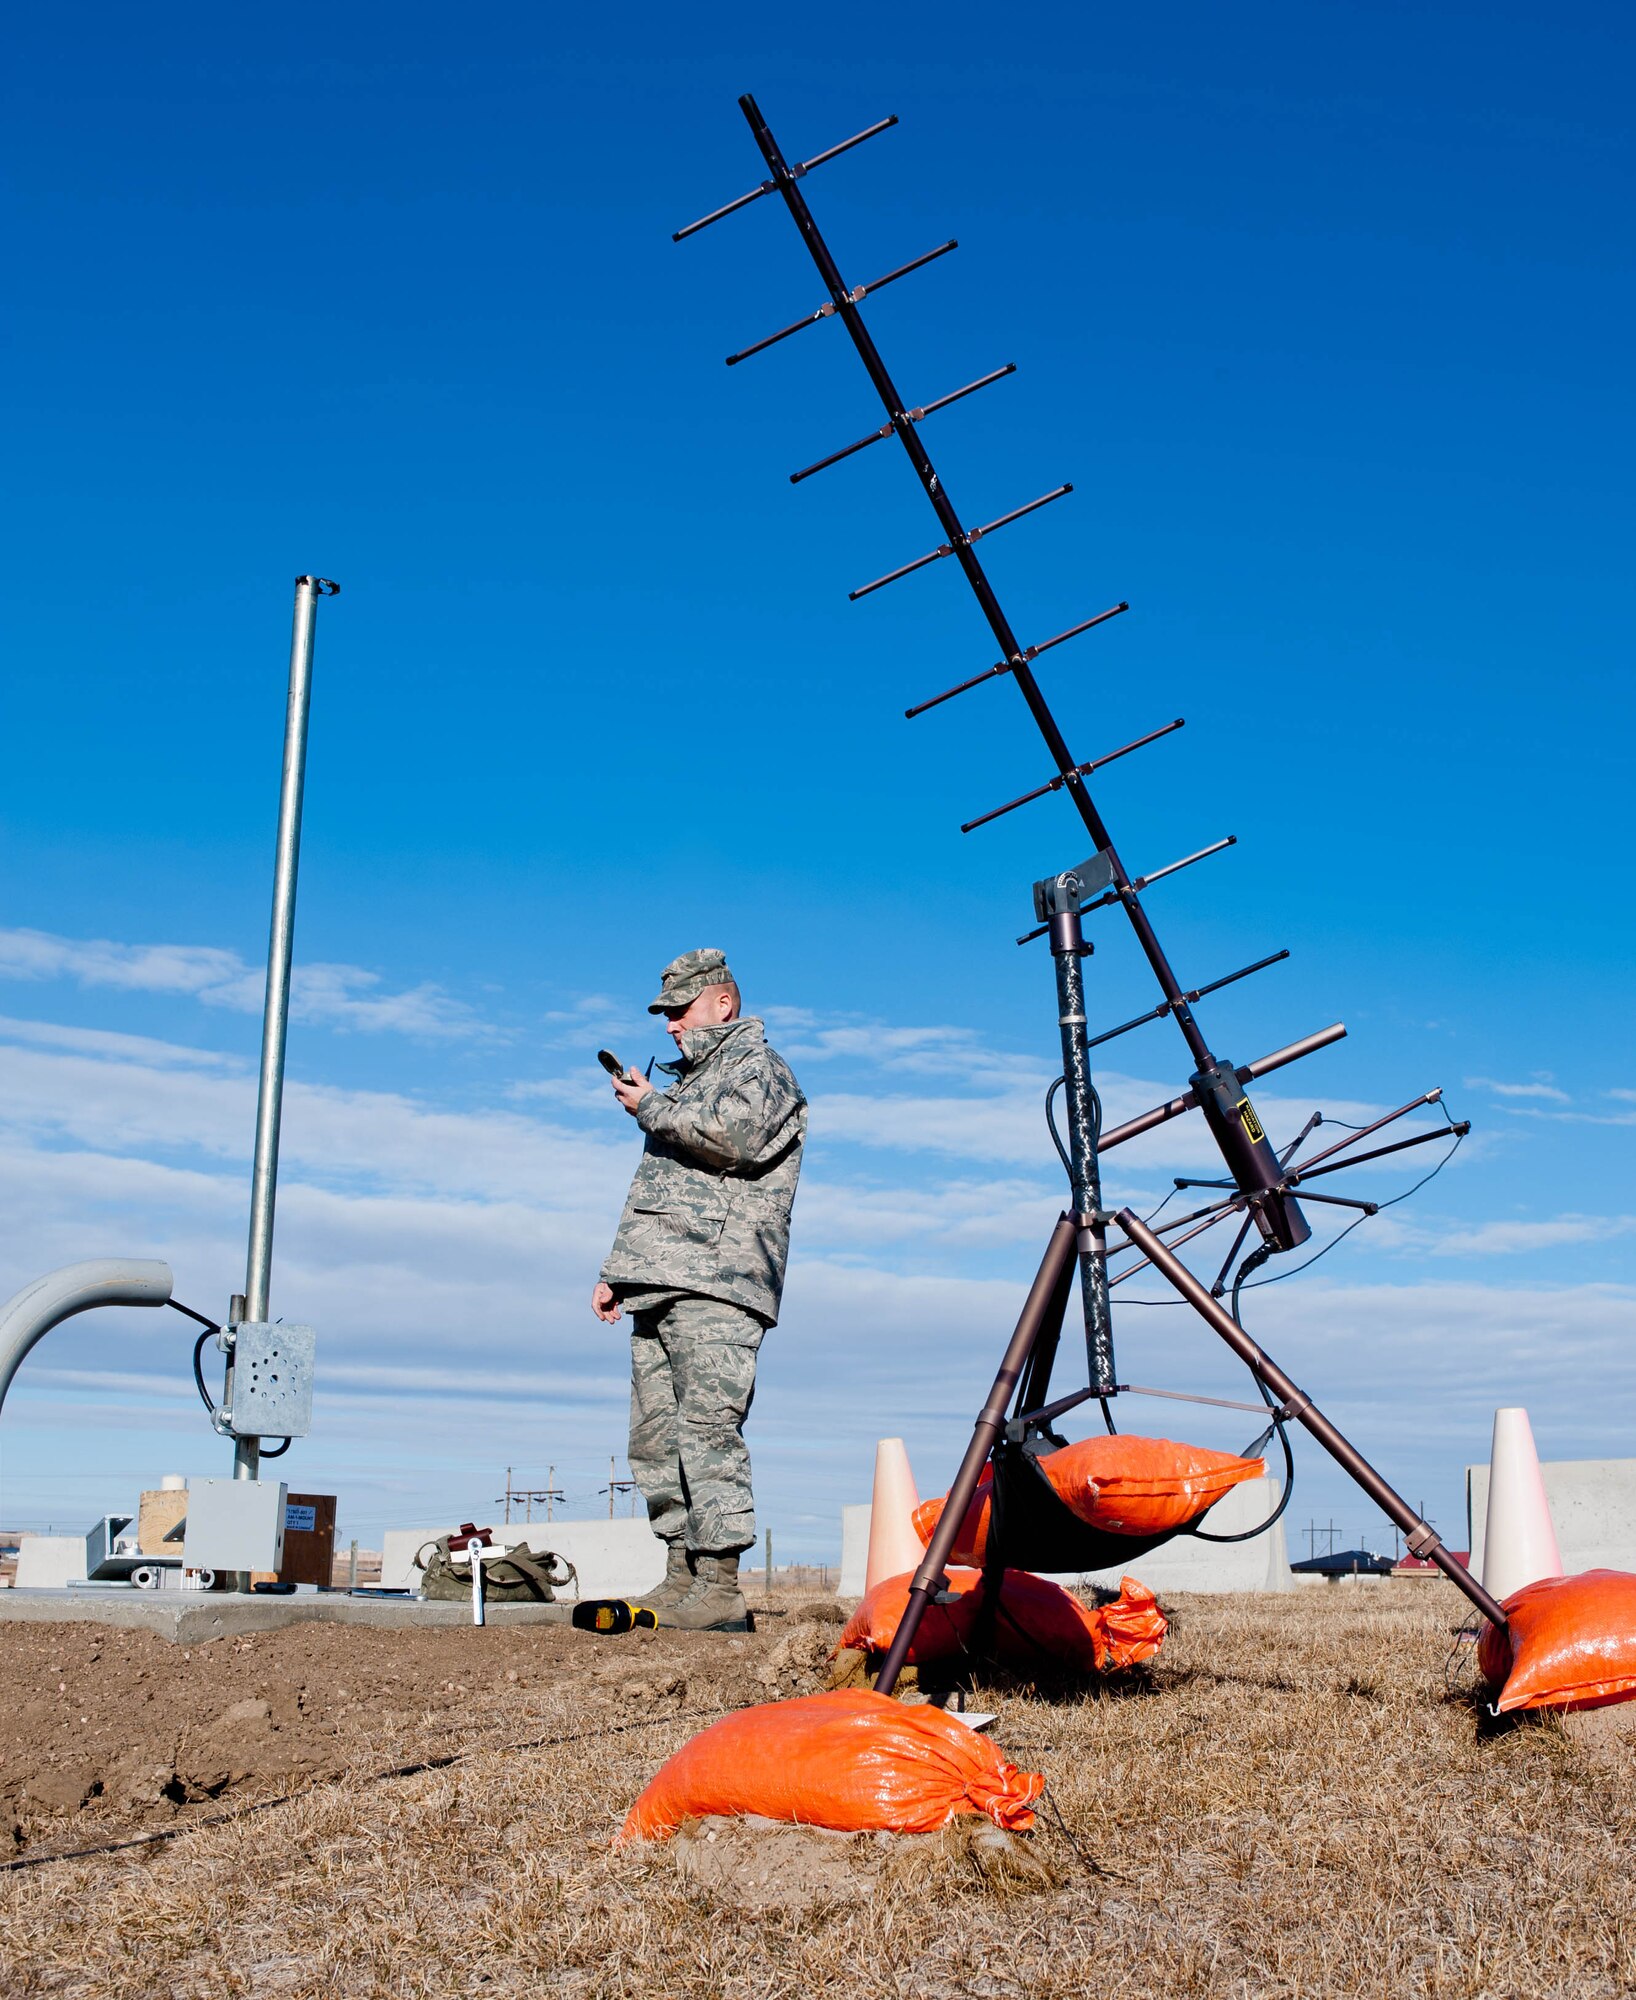 Master Sgt. James Shearer, 28th Communications Squadron transmission system radio maintainer, uses a compass to determine the position for a new helical antenna prior to installation on Ellsworth Air Force Base, S.D., Feb. 13, 2012. Shearer installed the new antenna to secure data transfer between military installations across the U.S. (U.S. Air Force photo by Airman 1st Class Zachary Hada/Released)